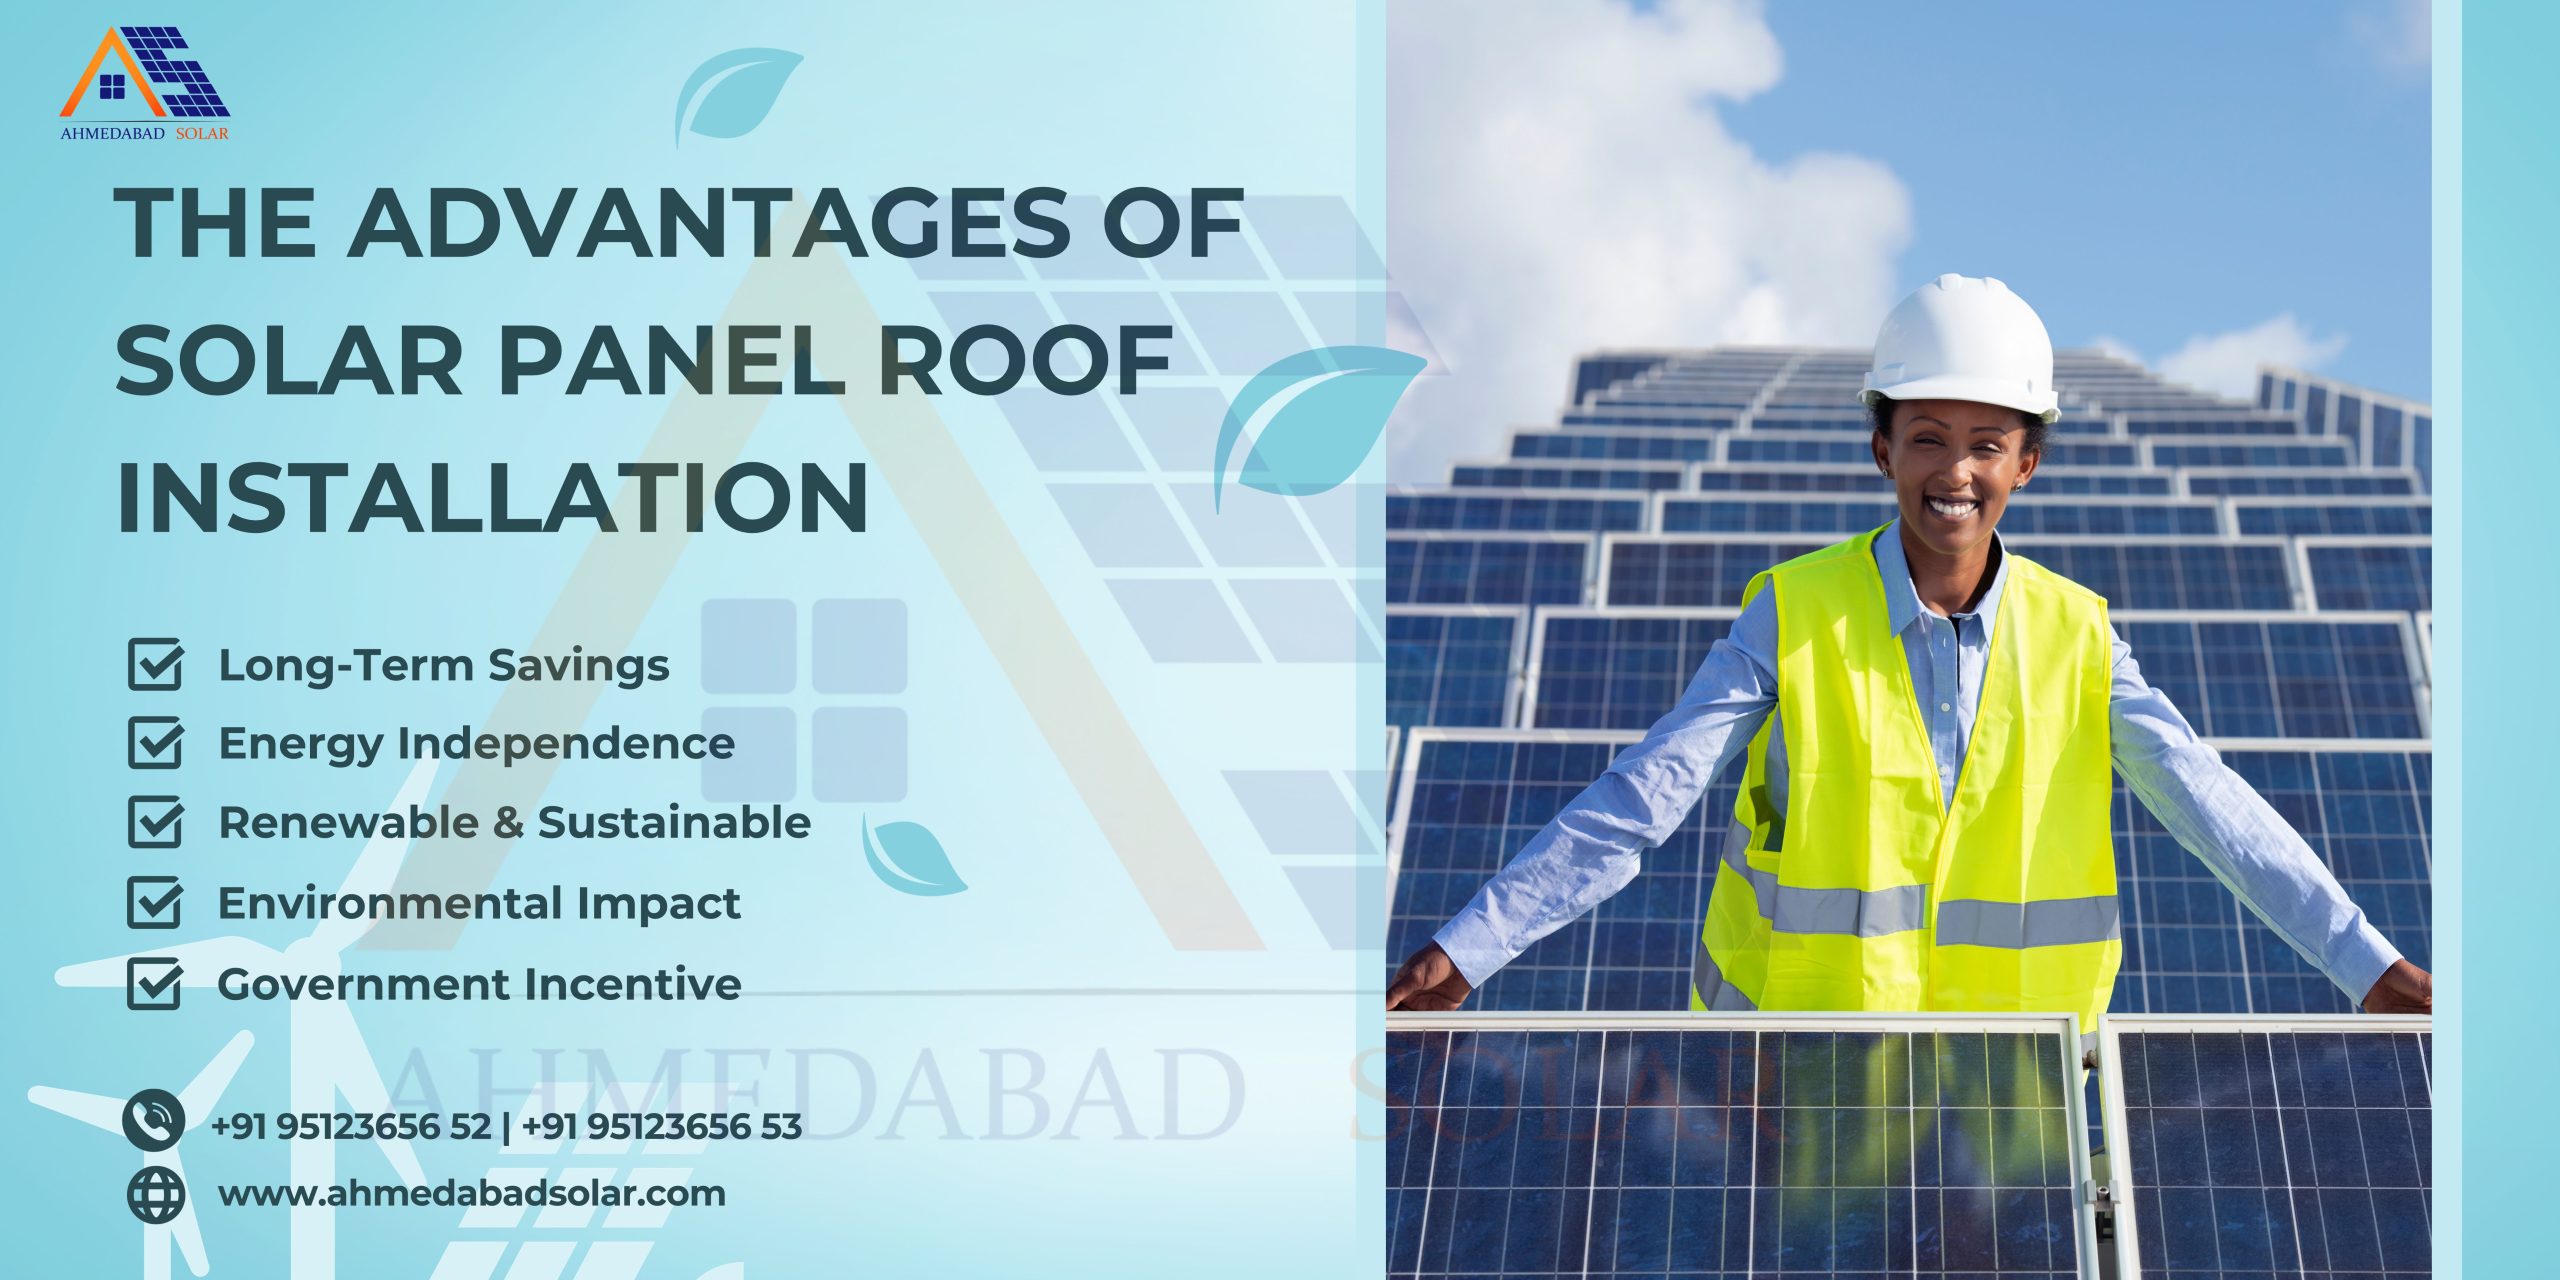 The Advantages of Solar Panel Roof Installation